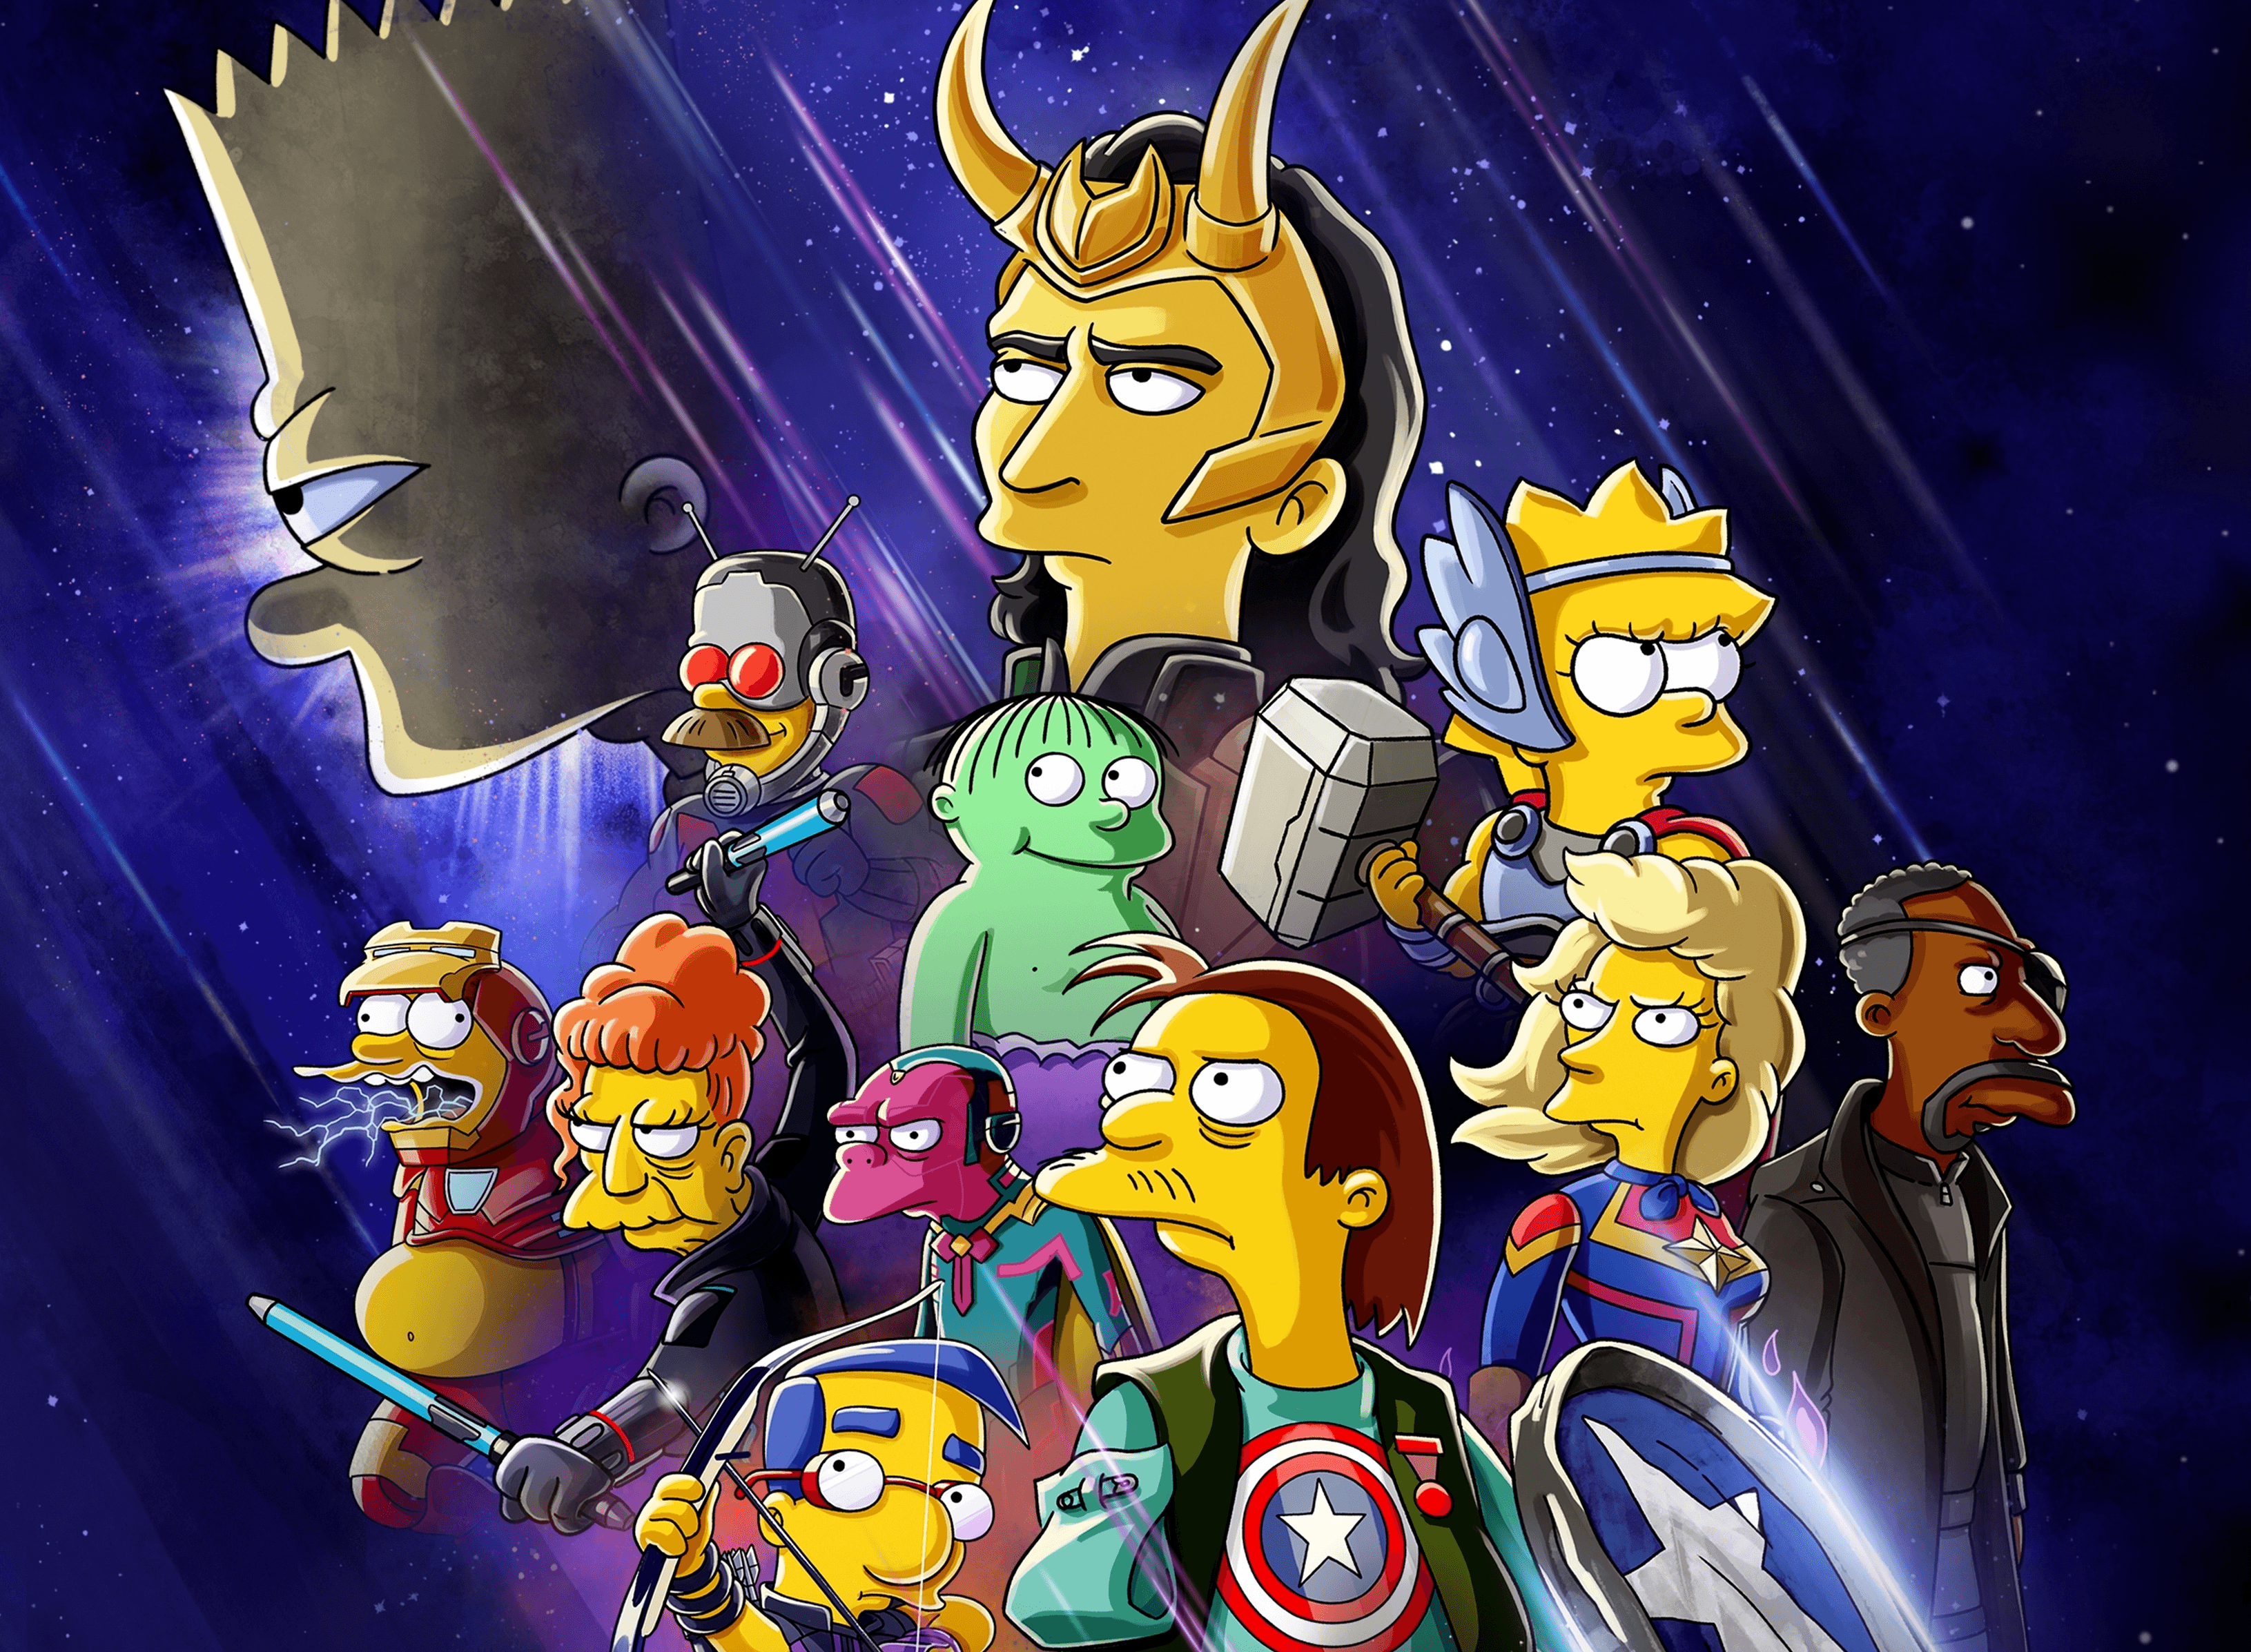 A Marvel Themed Simpsons Episode is Coming to Disney+